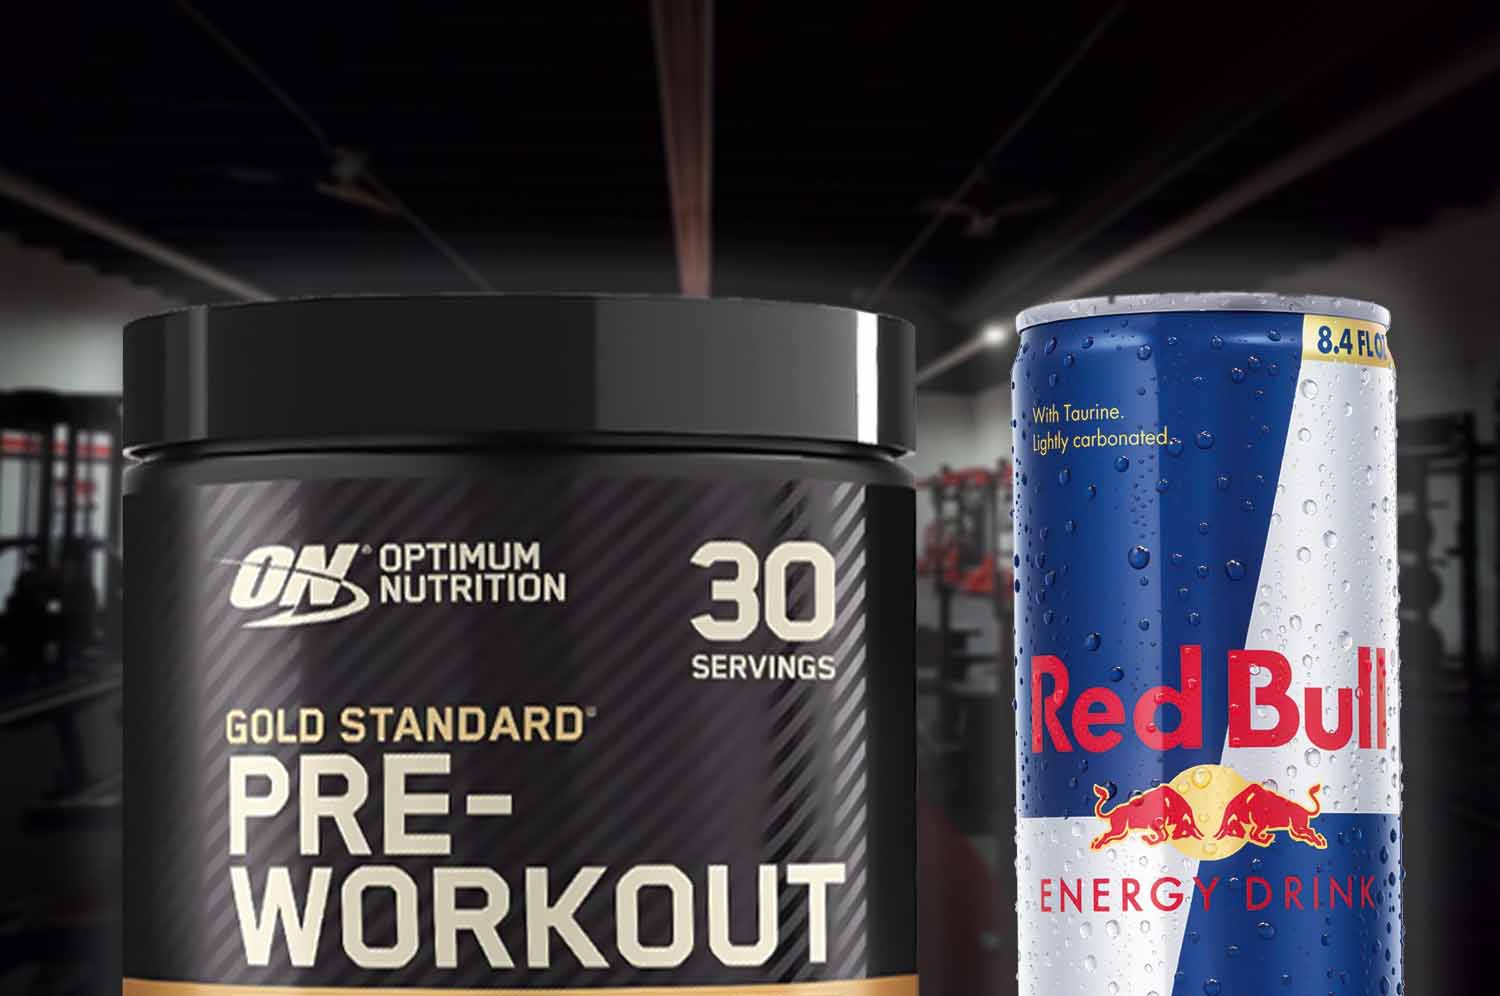 Tub of optimum nutrition pre-workout on the left with can of red bull on the right with a blurred out gym in background